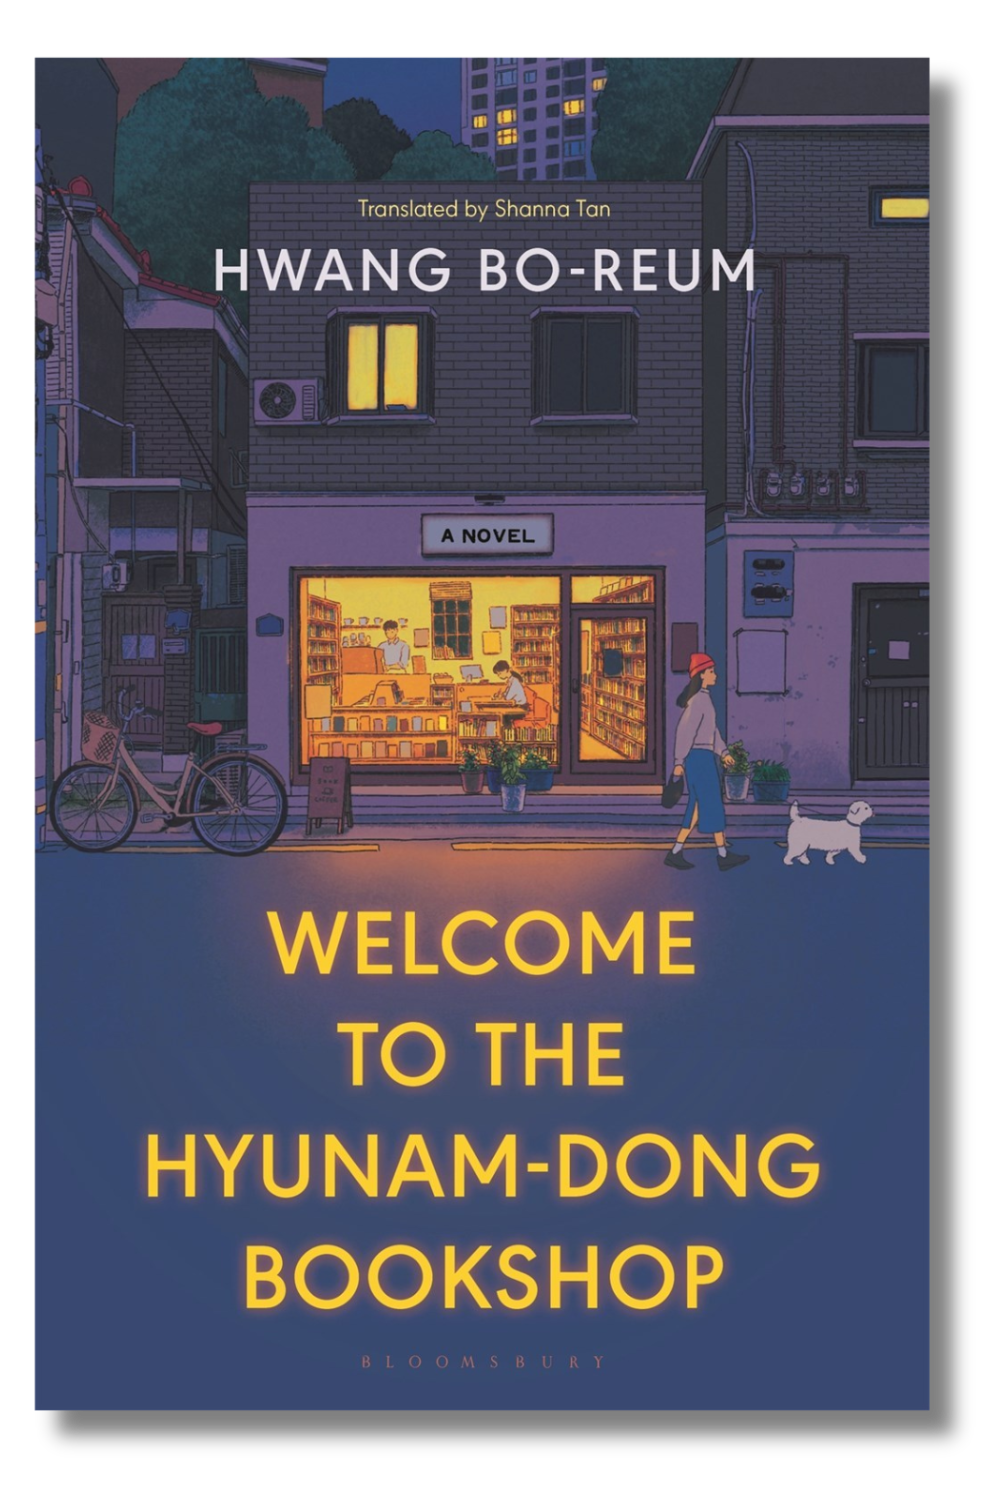 The cover of "Welcome to the Hyunam-Dong Bookshop" by Hwang Bo-reum, tr. by Shanna Tan